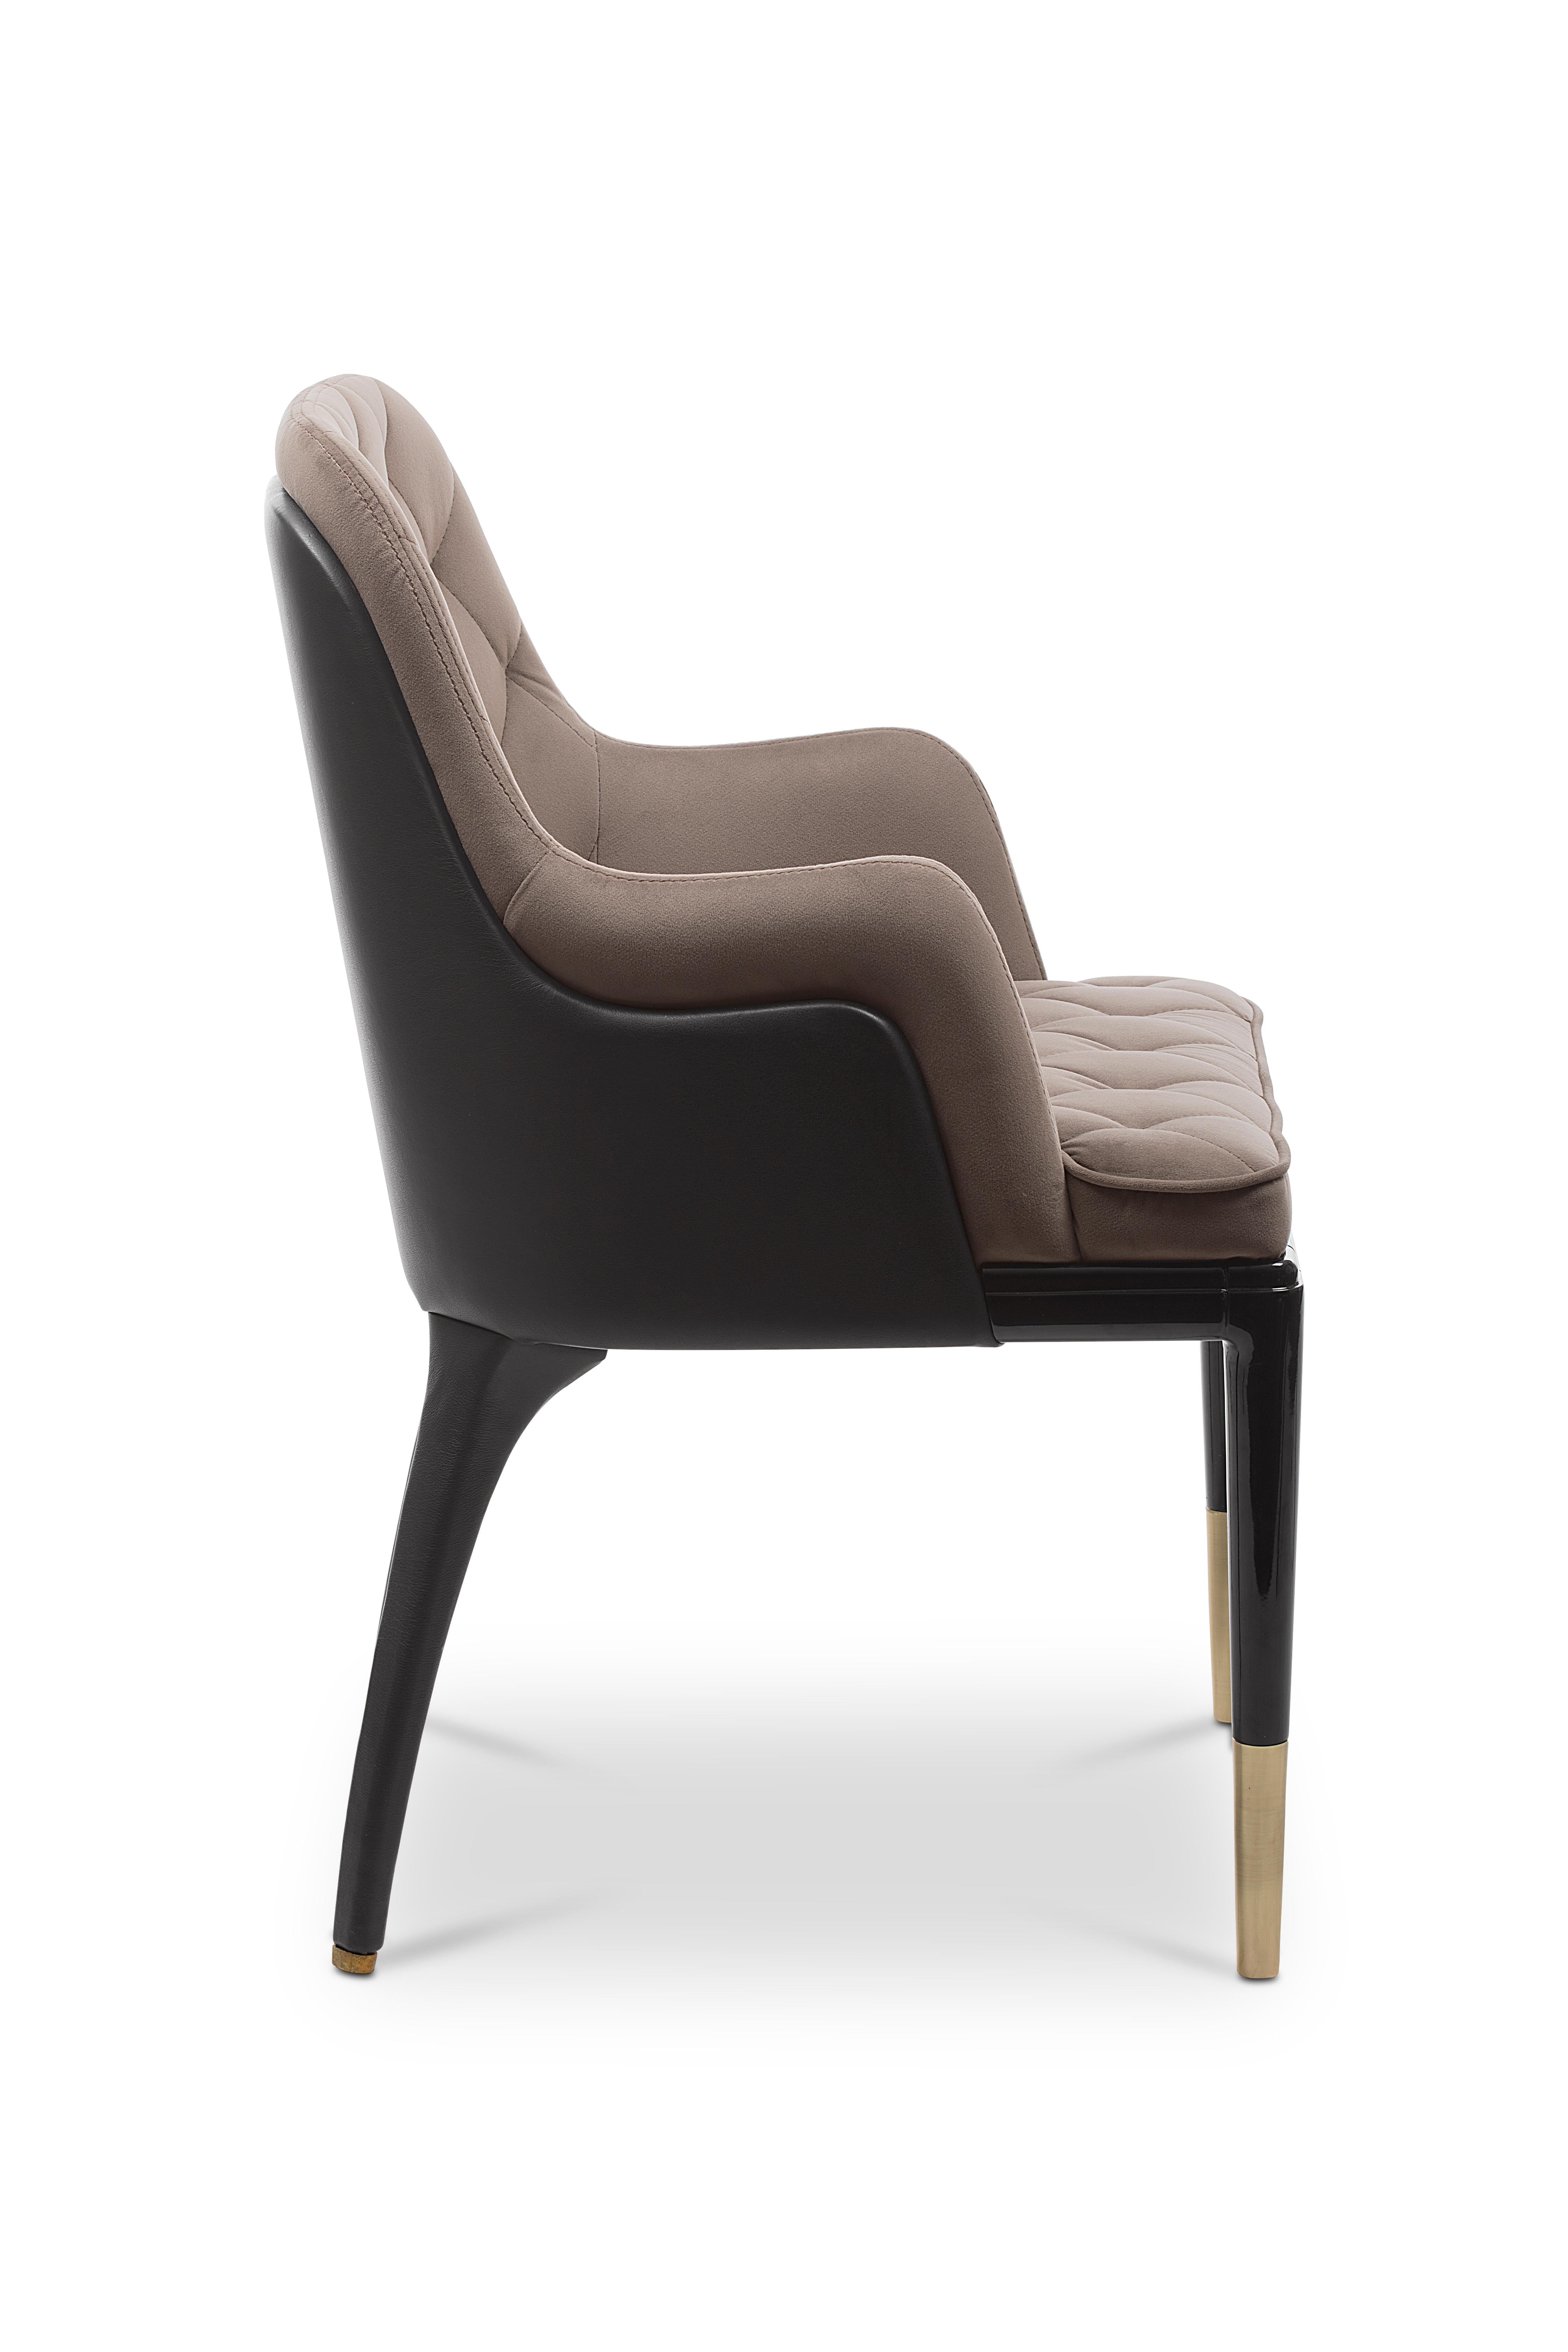 charla dining chair